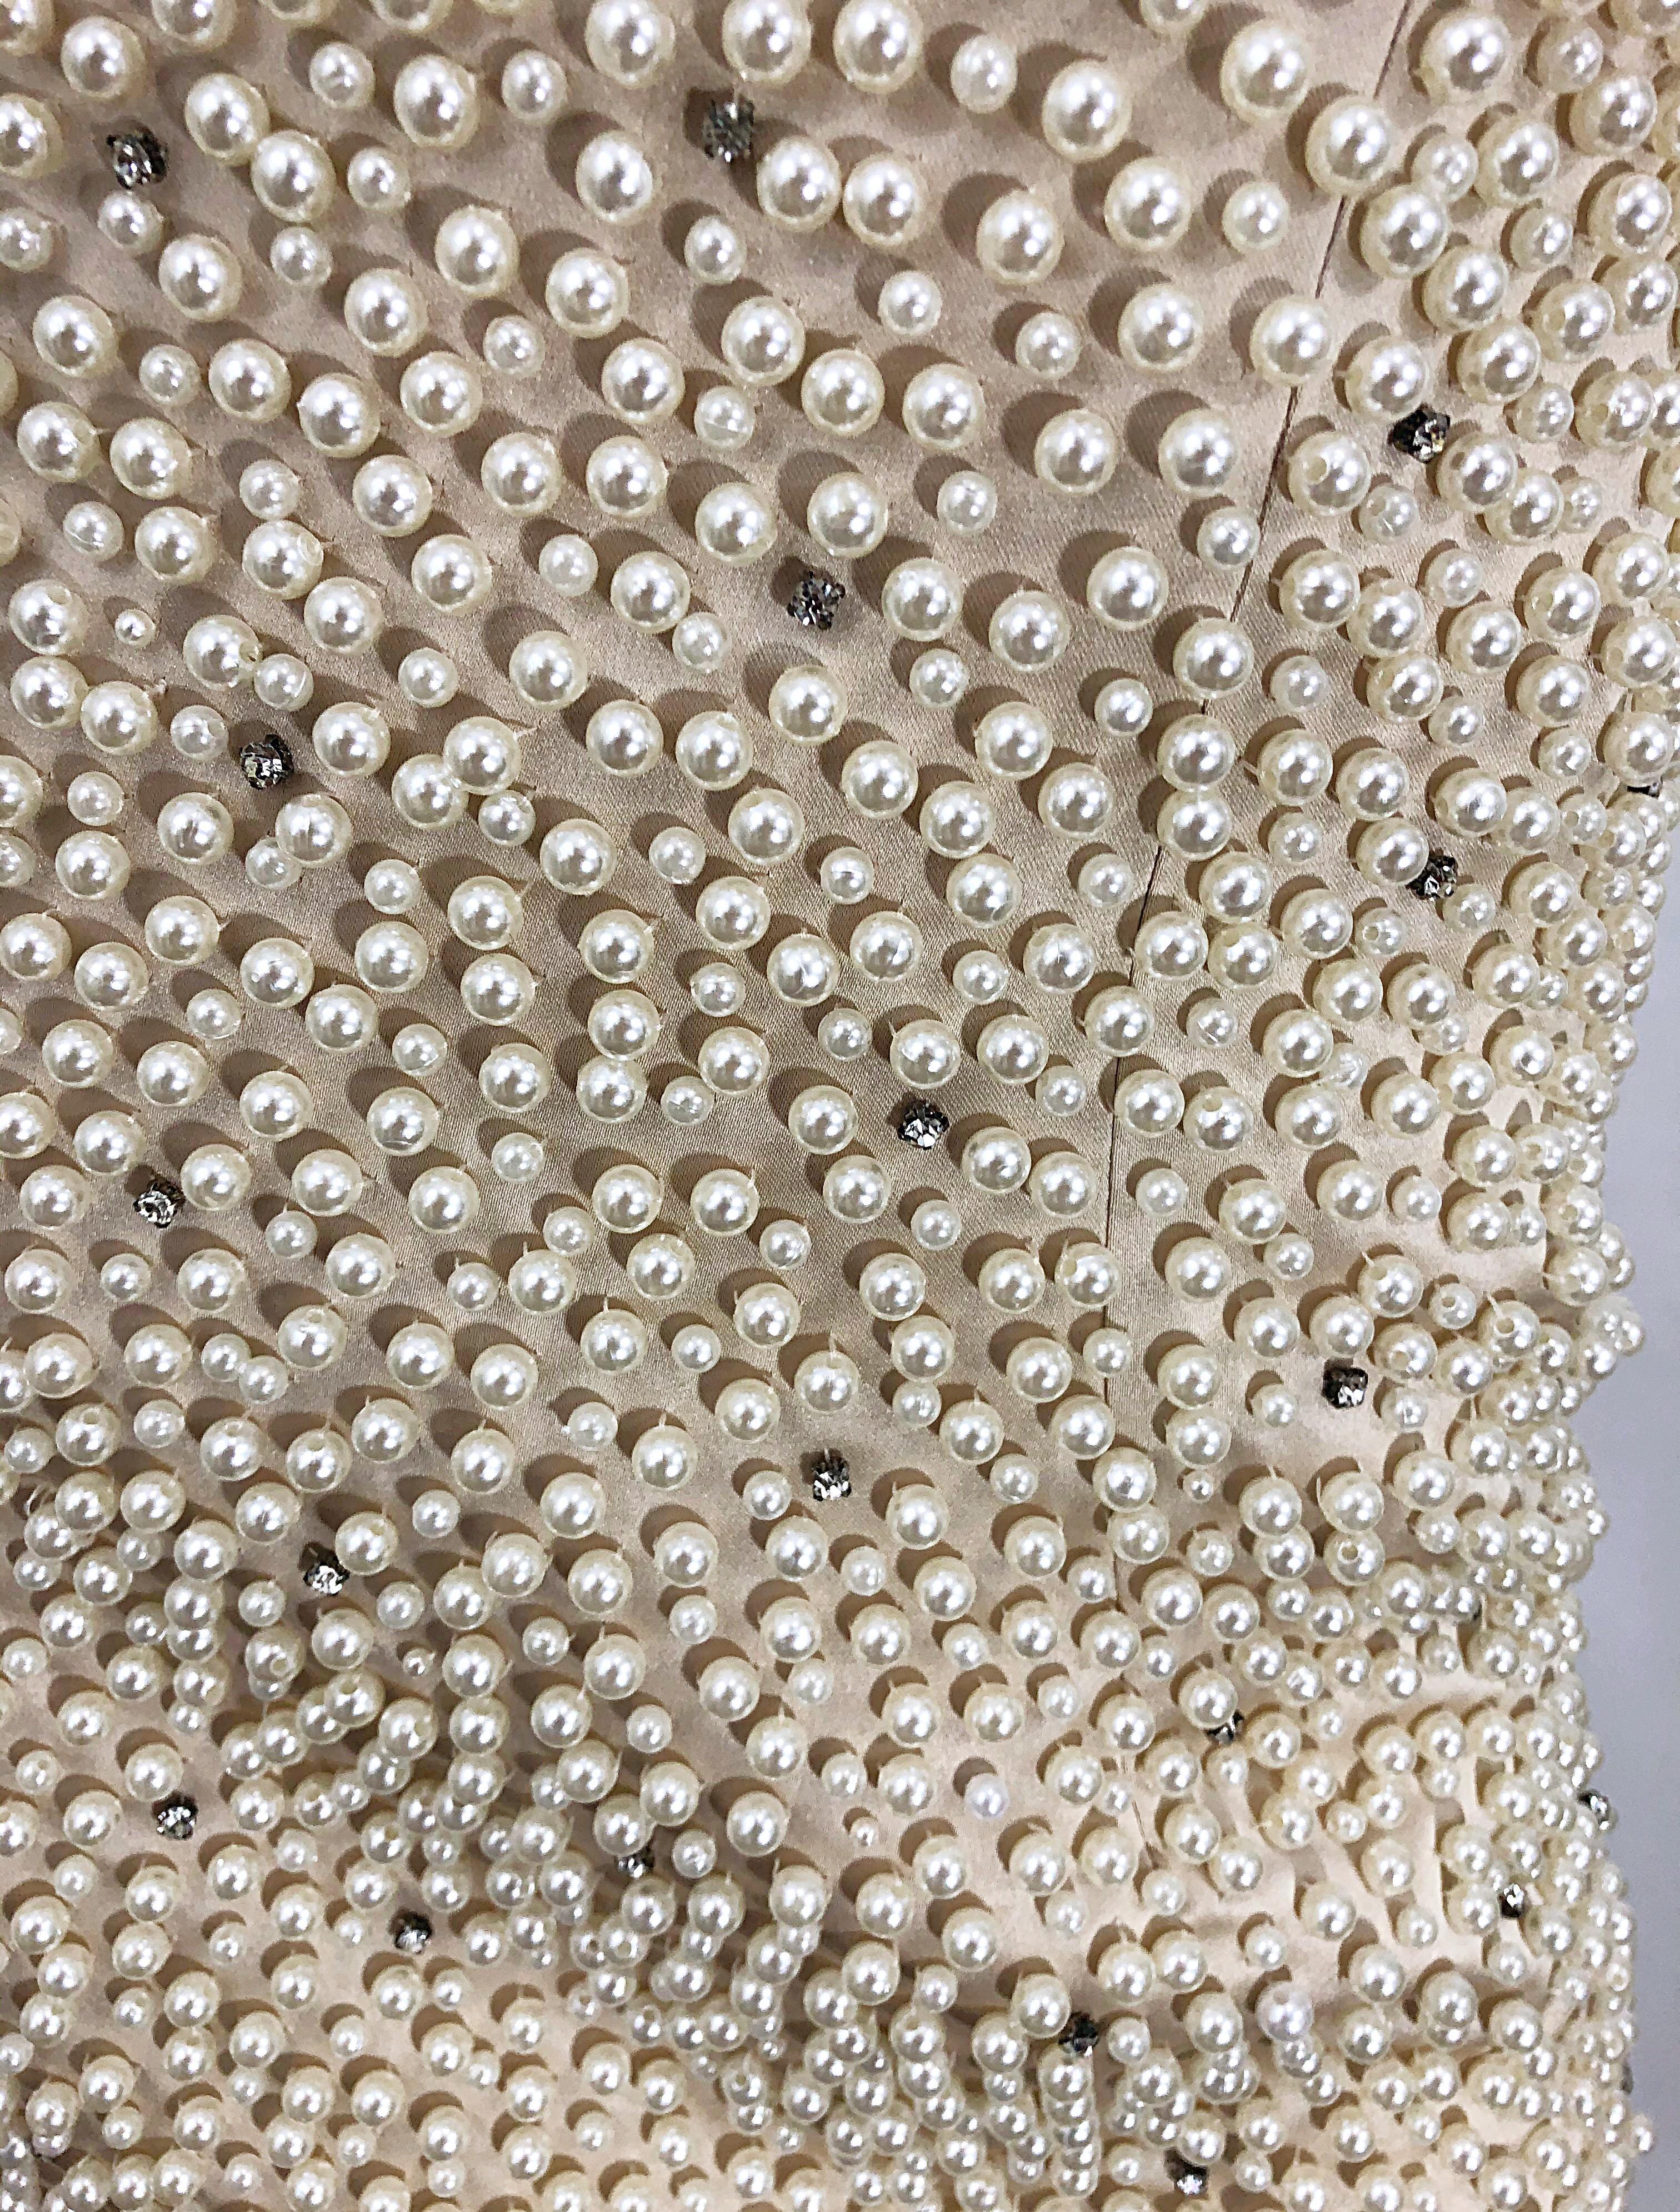 Phenomenal vintage late 80s pearl and rhinestone encrusted couture bodycon gown! Features thousands of 
hand-sewn pearls and rhinestones throughout. Built in interior support keeps everything in place. Nude chiffon overlay at legs. Couture quality